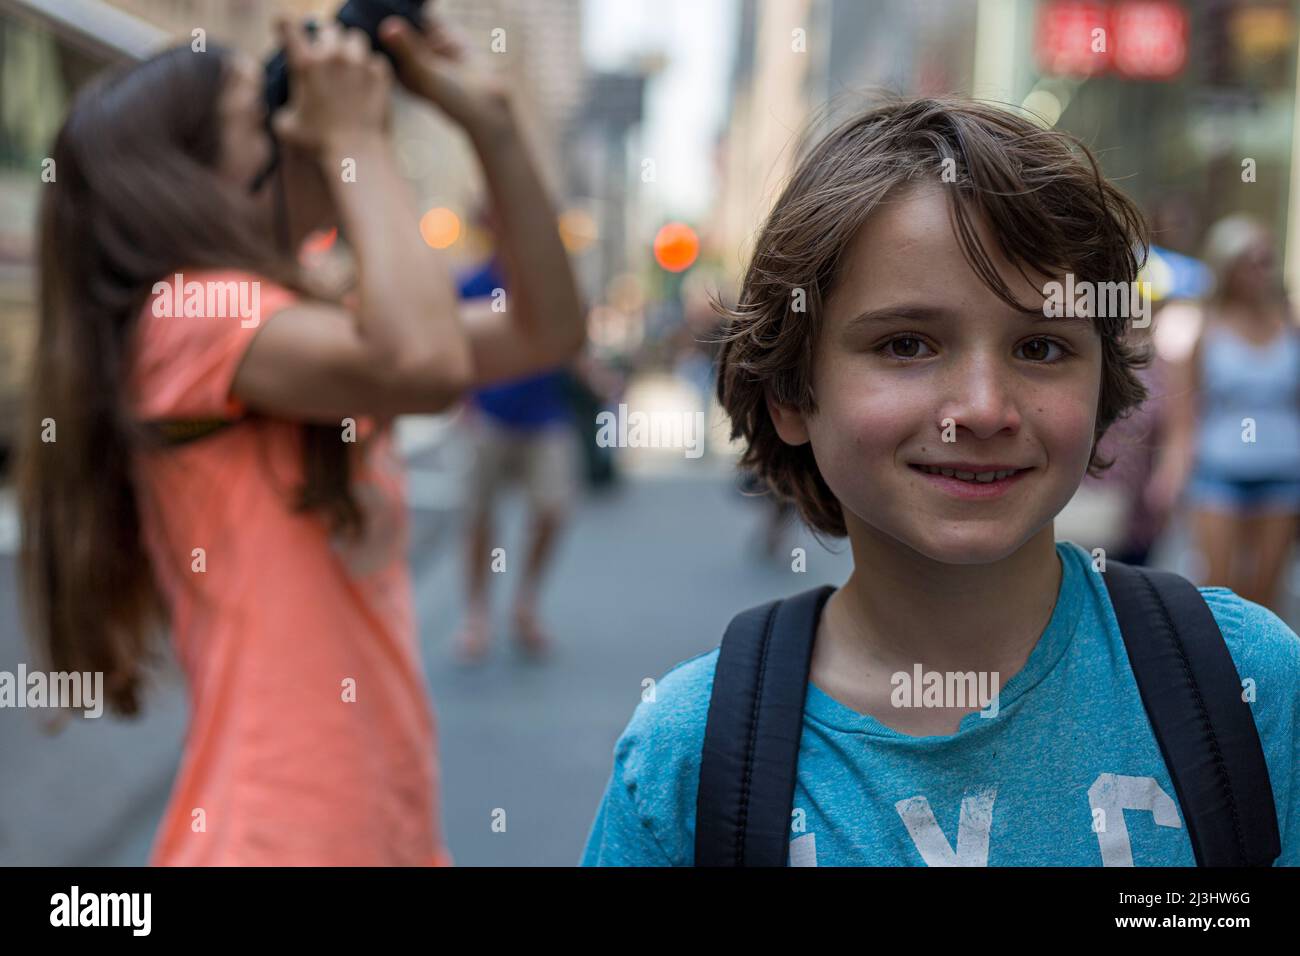 5 Avenue & West 54 Street, New York City, NY, USA, 14 years old caucasian teenager girl and 12 years old caucasian teenager boy - both with brown hair and summer styling in the streets Stock Photo